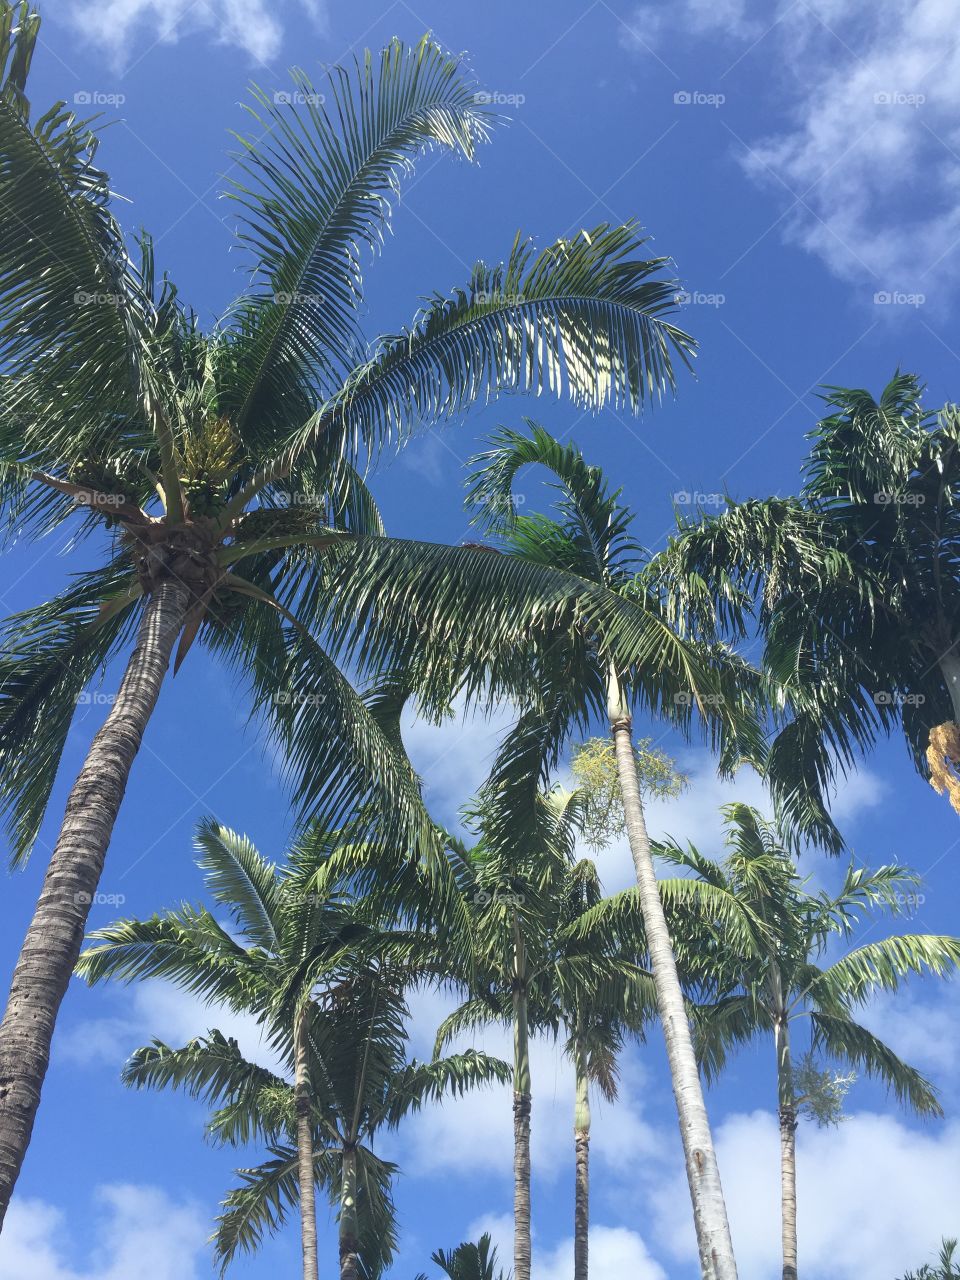 Floridian Palm Trees